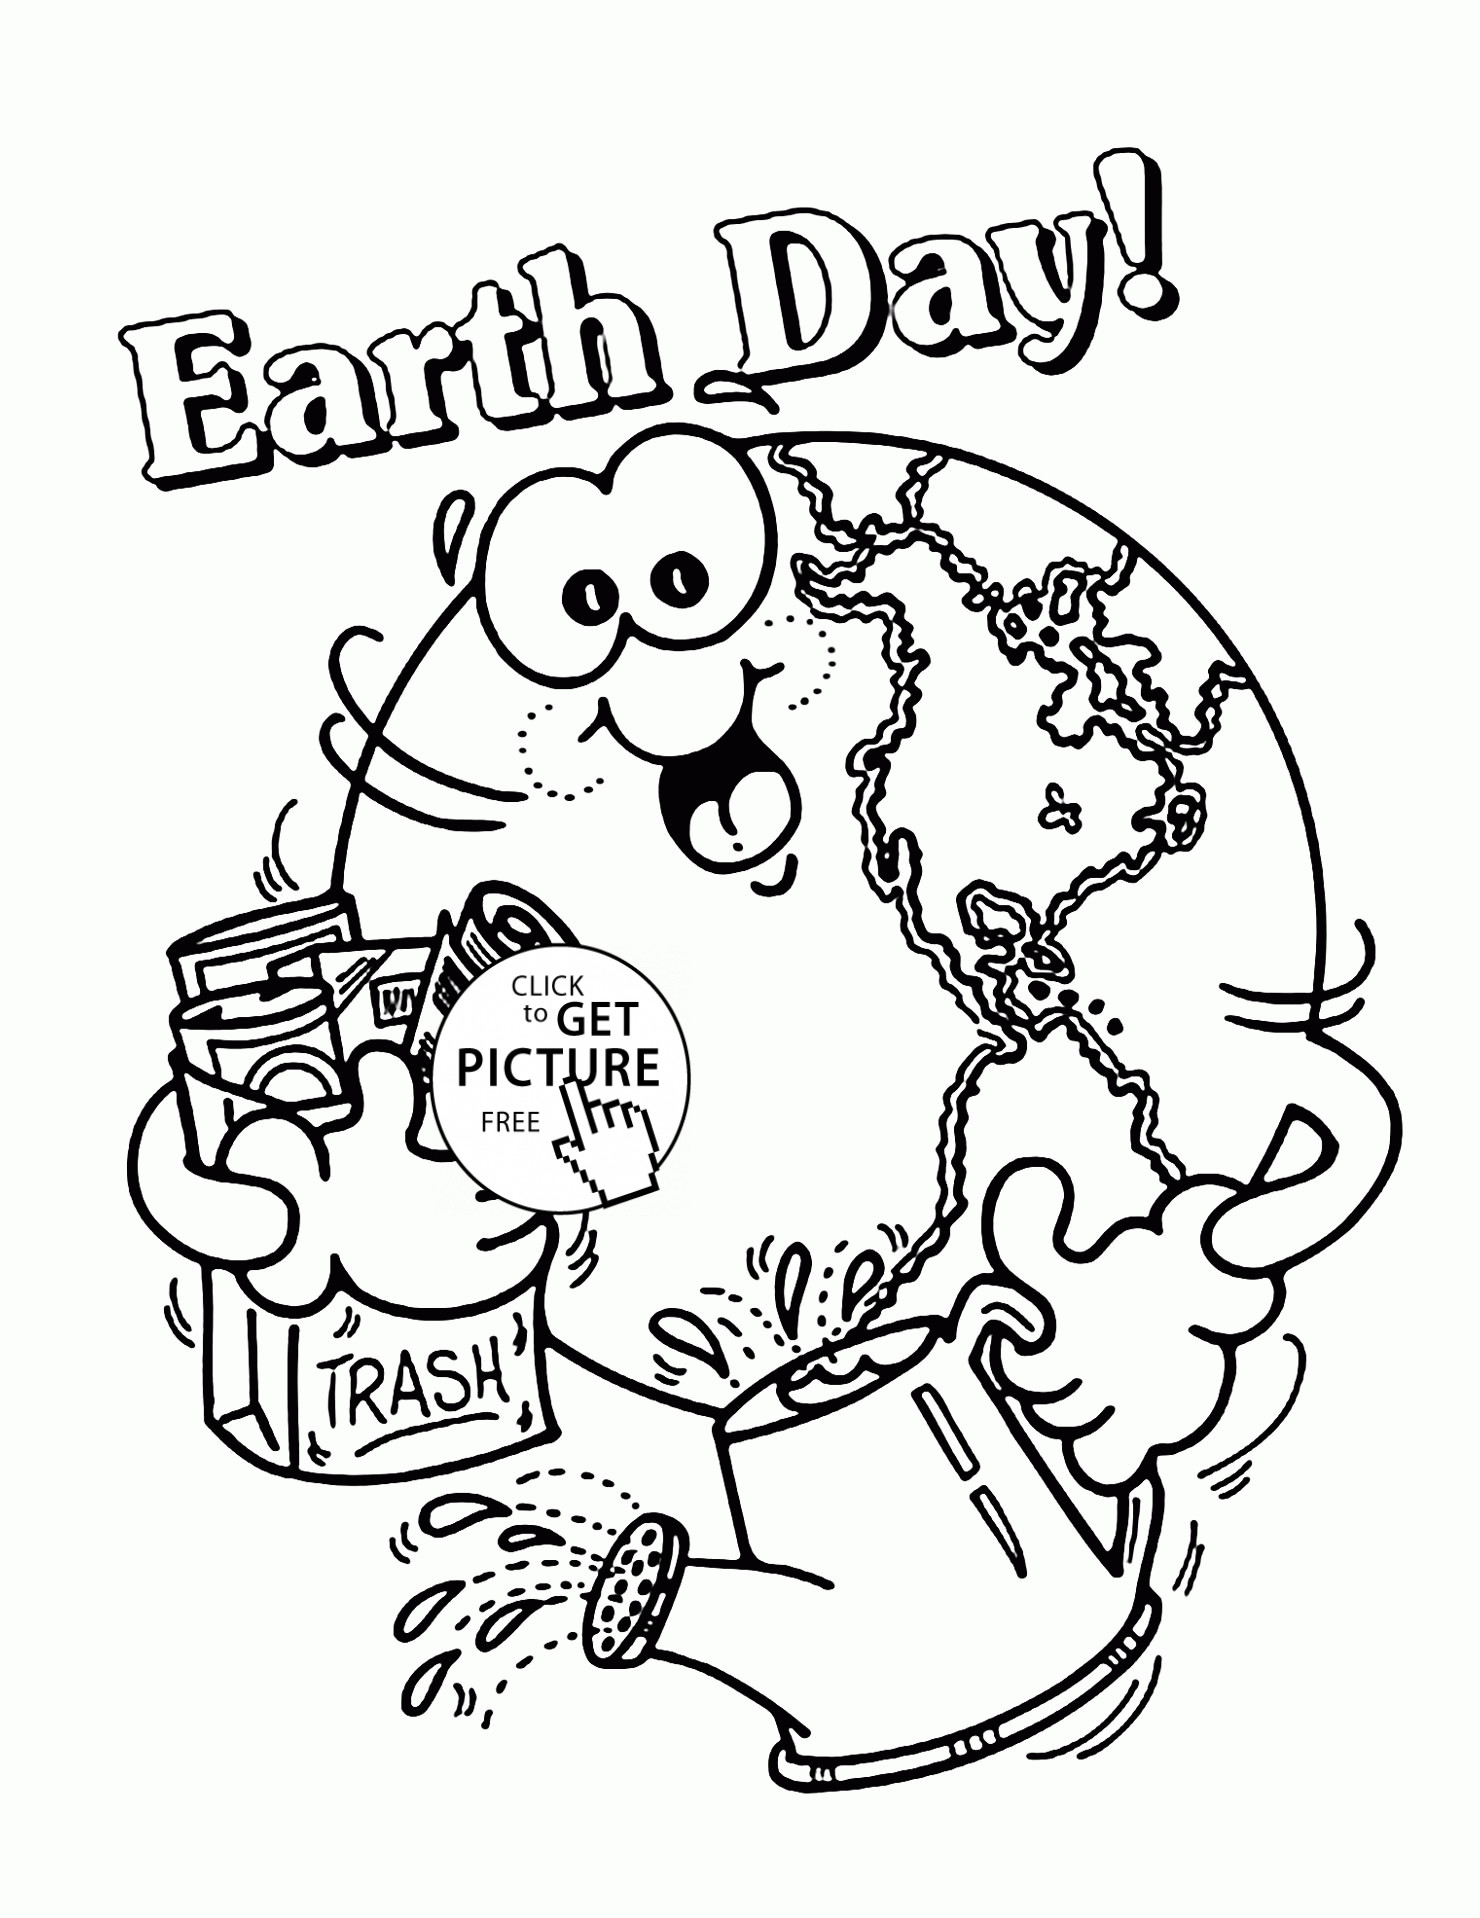 Earth Day Coloring Pages
 Happy Earth Earth Day coloring page for kids coloring